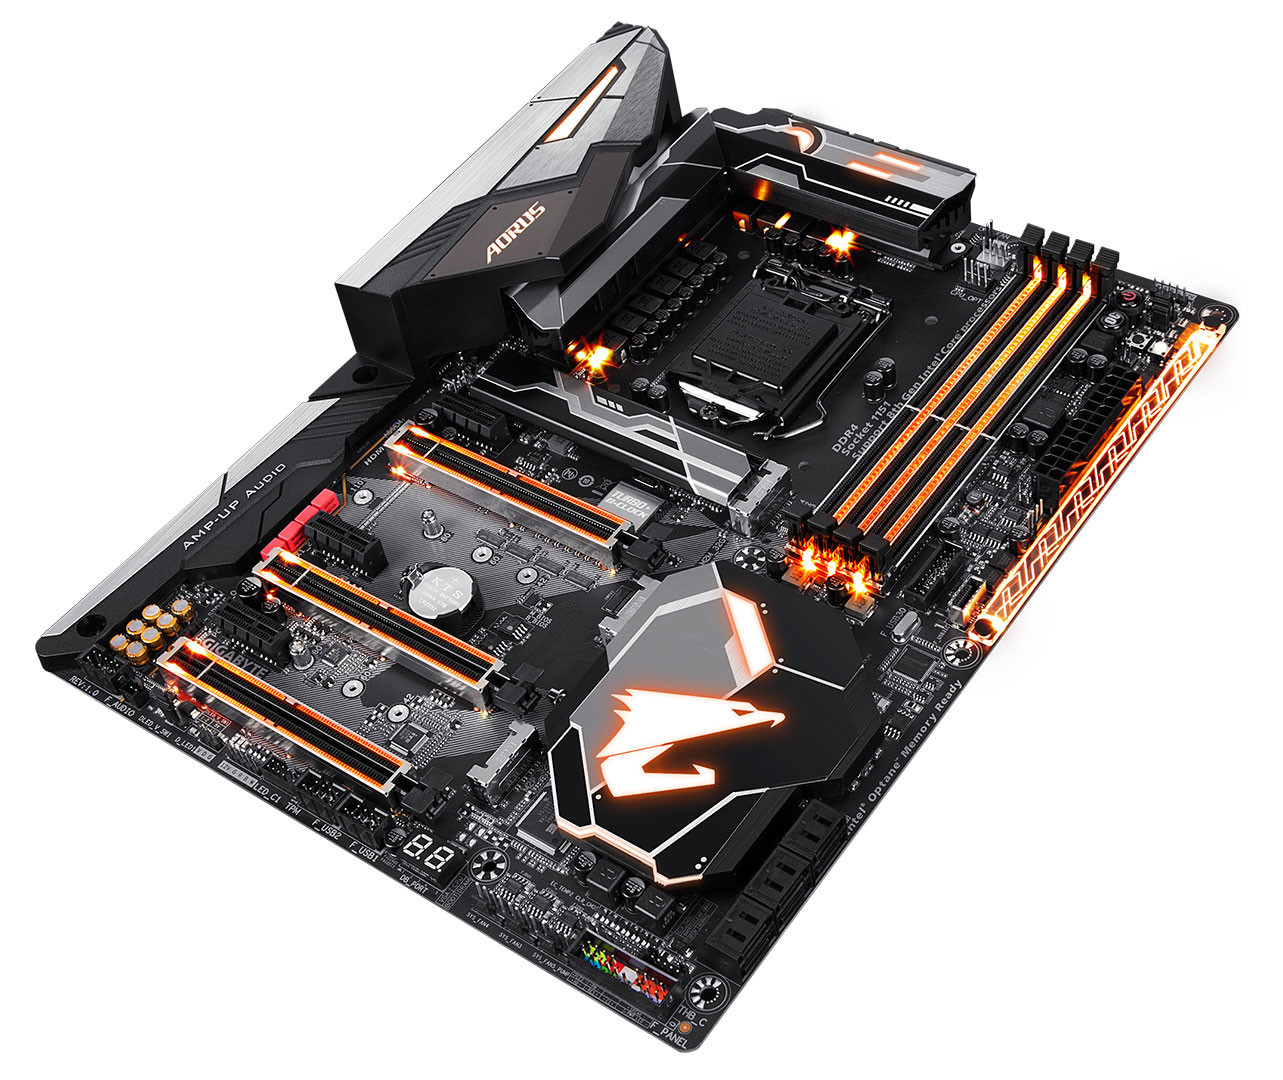 gigabyte-unleashes-its-z370-aorus-gaming-7-motherboard-techpowerup